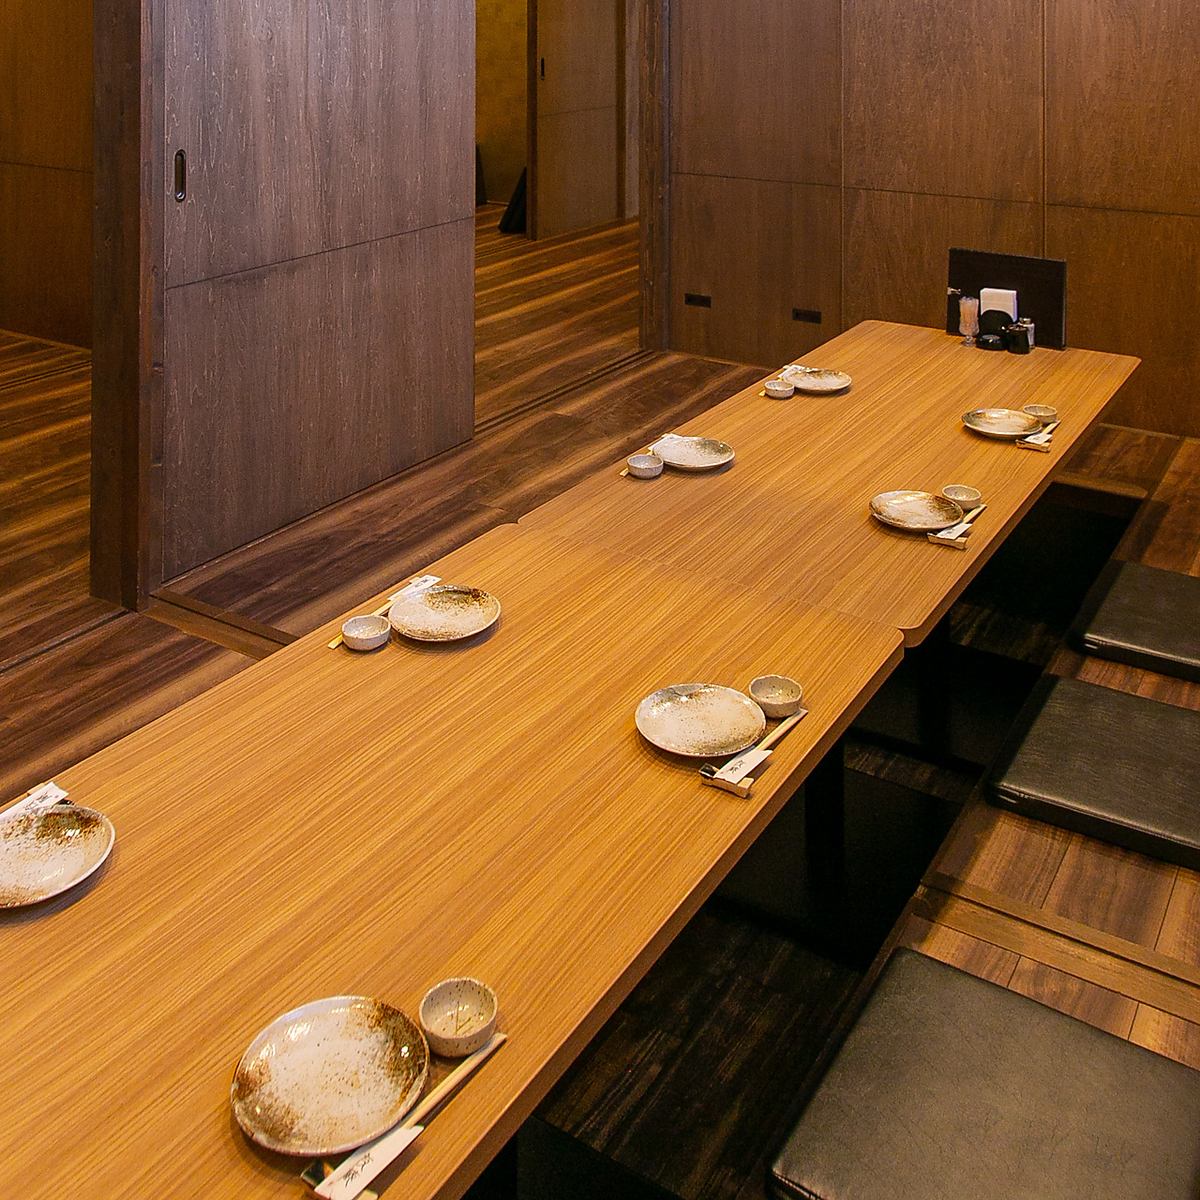 Even if you have a large party, you can relax in a private room with a sunken kotatsu ◎